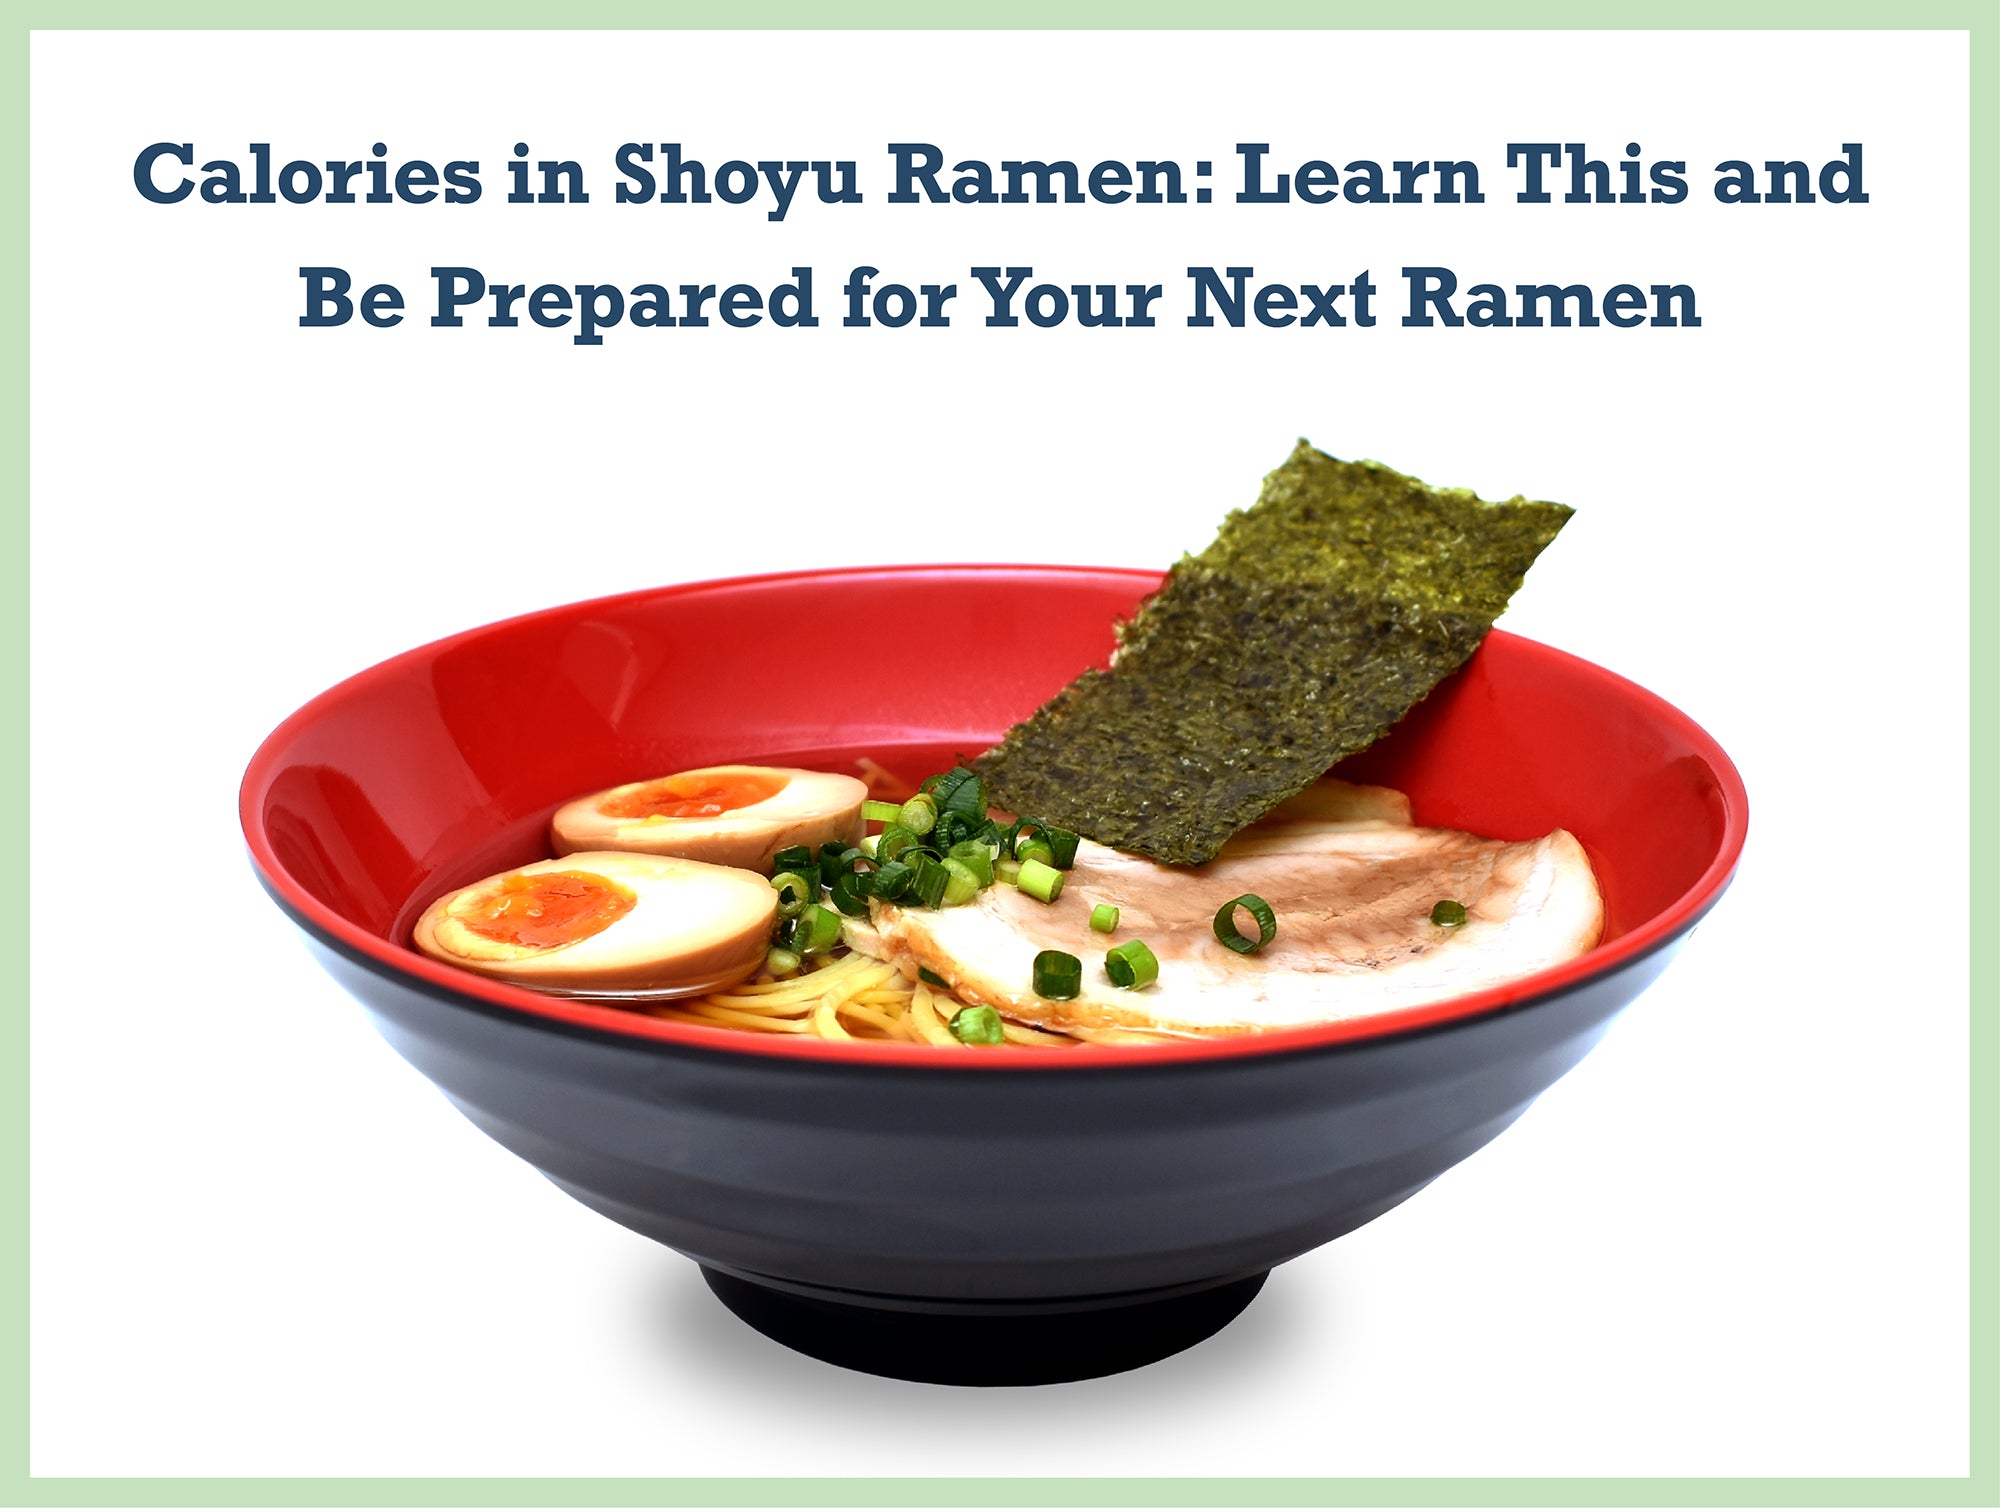 Calories in Shoyu Ramen: Learn This and Be Prepared for Your Next Ramen